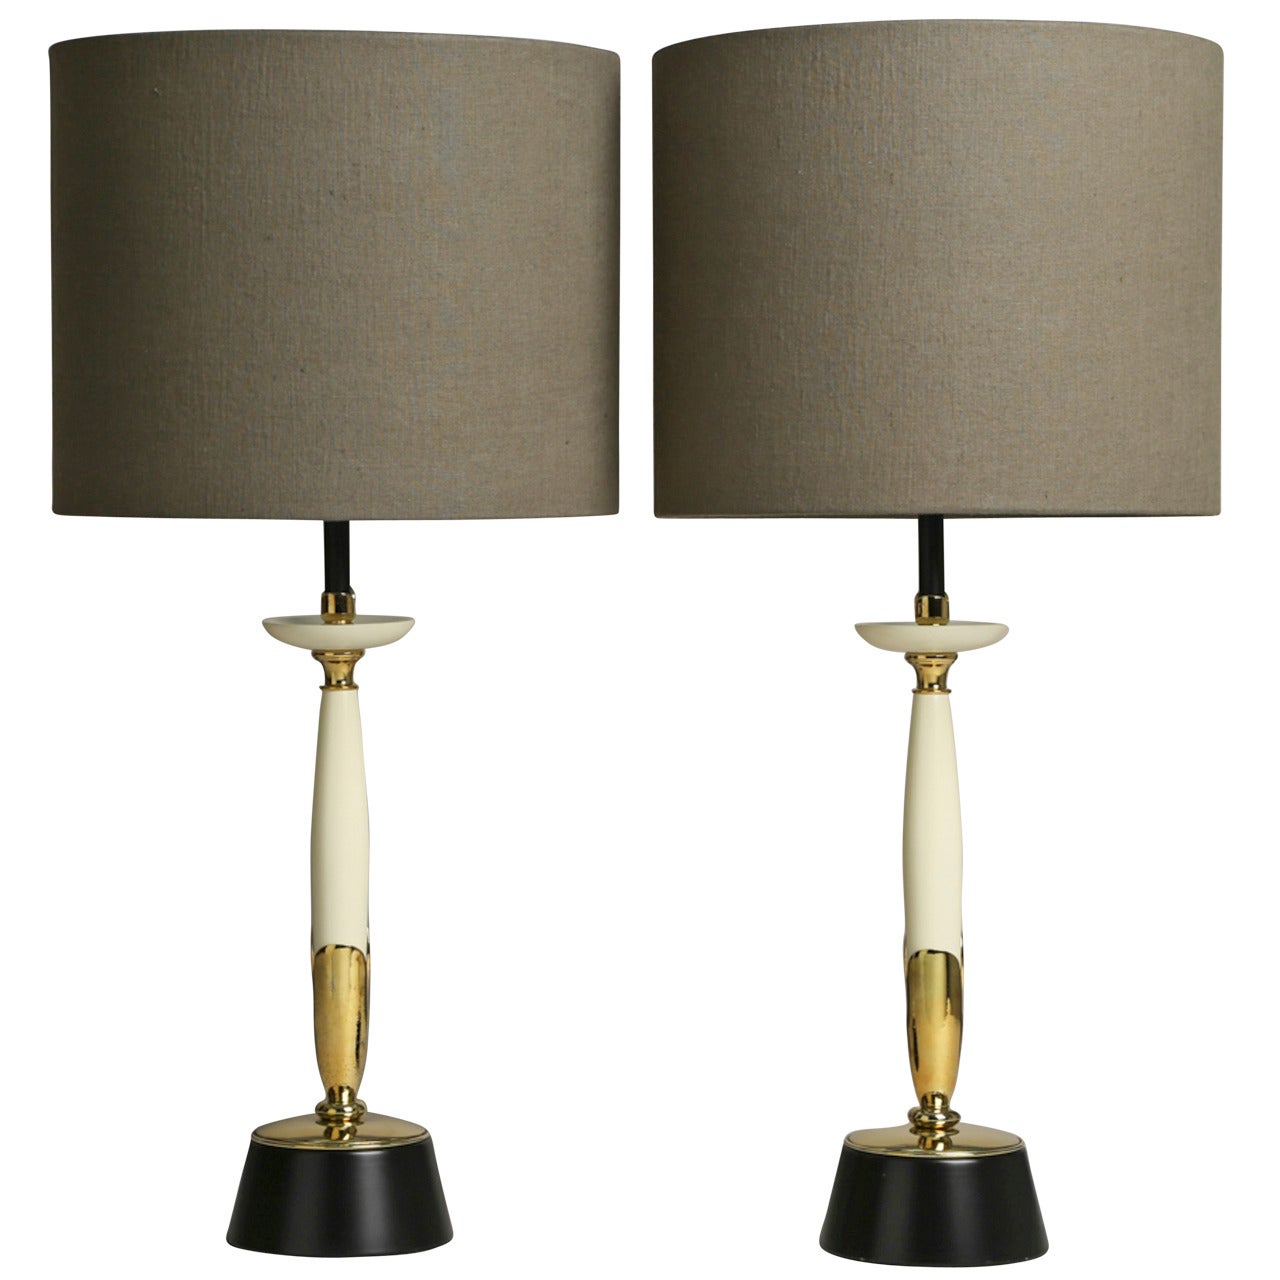 A Pair of Cream and Brass Rembrandt designed Table Lamps 1960s